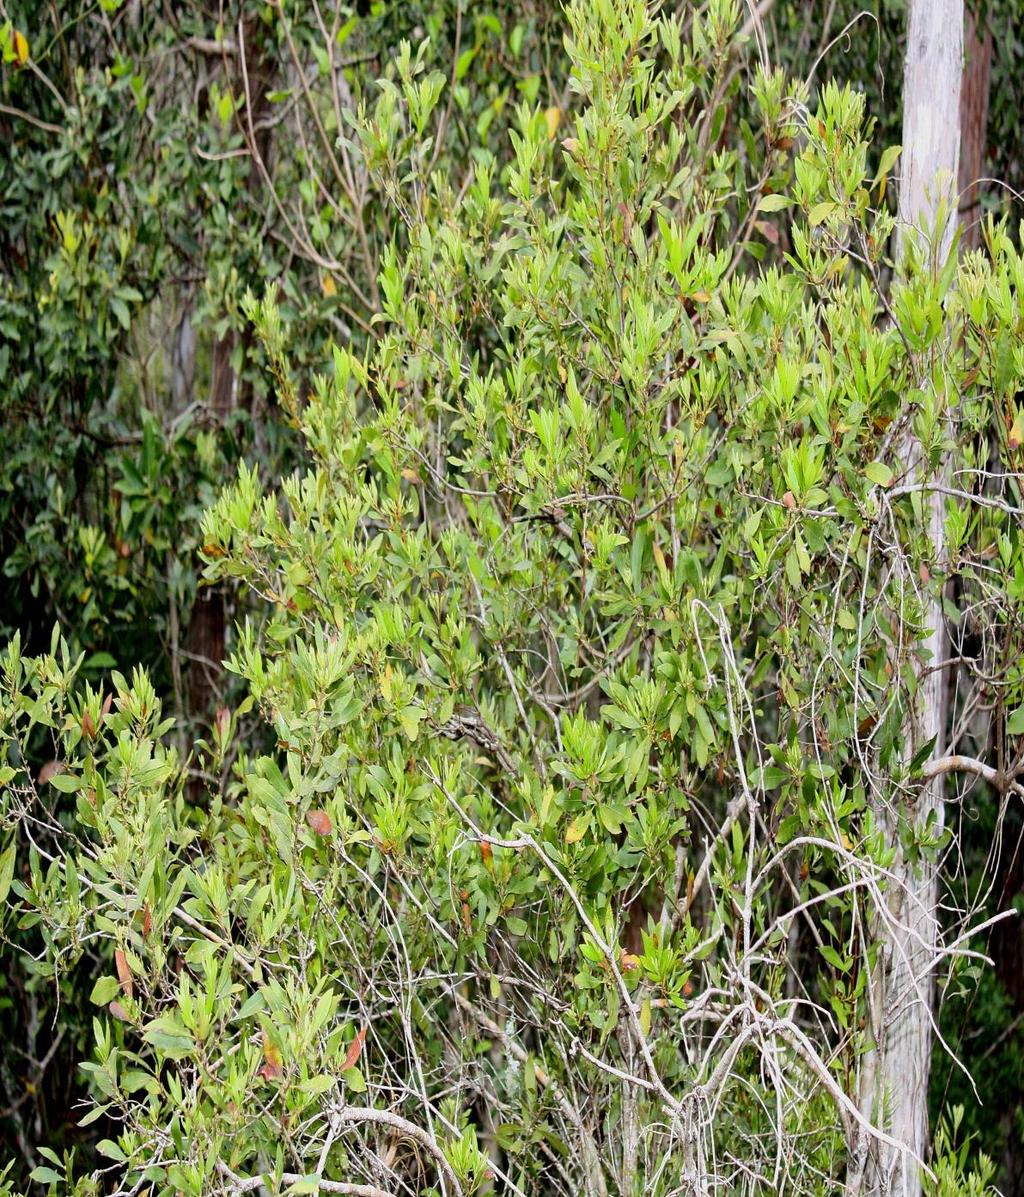 Wax Myrtle Also known as southern bayberry is one of Florida s wide spread plants. It can be found in a variety of habitats.